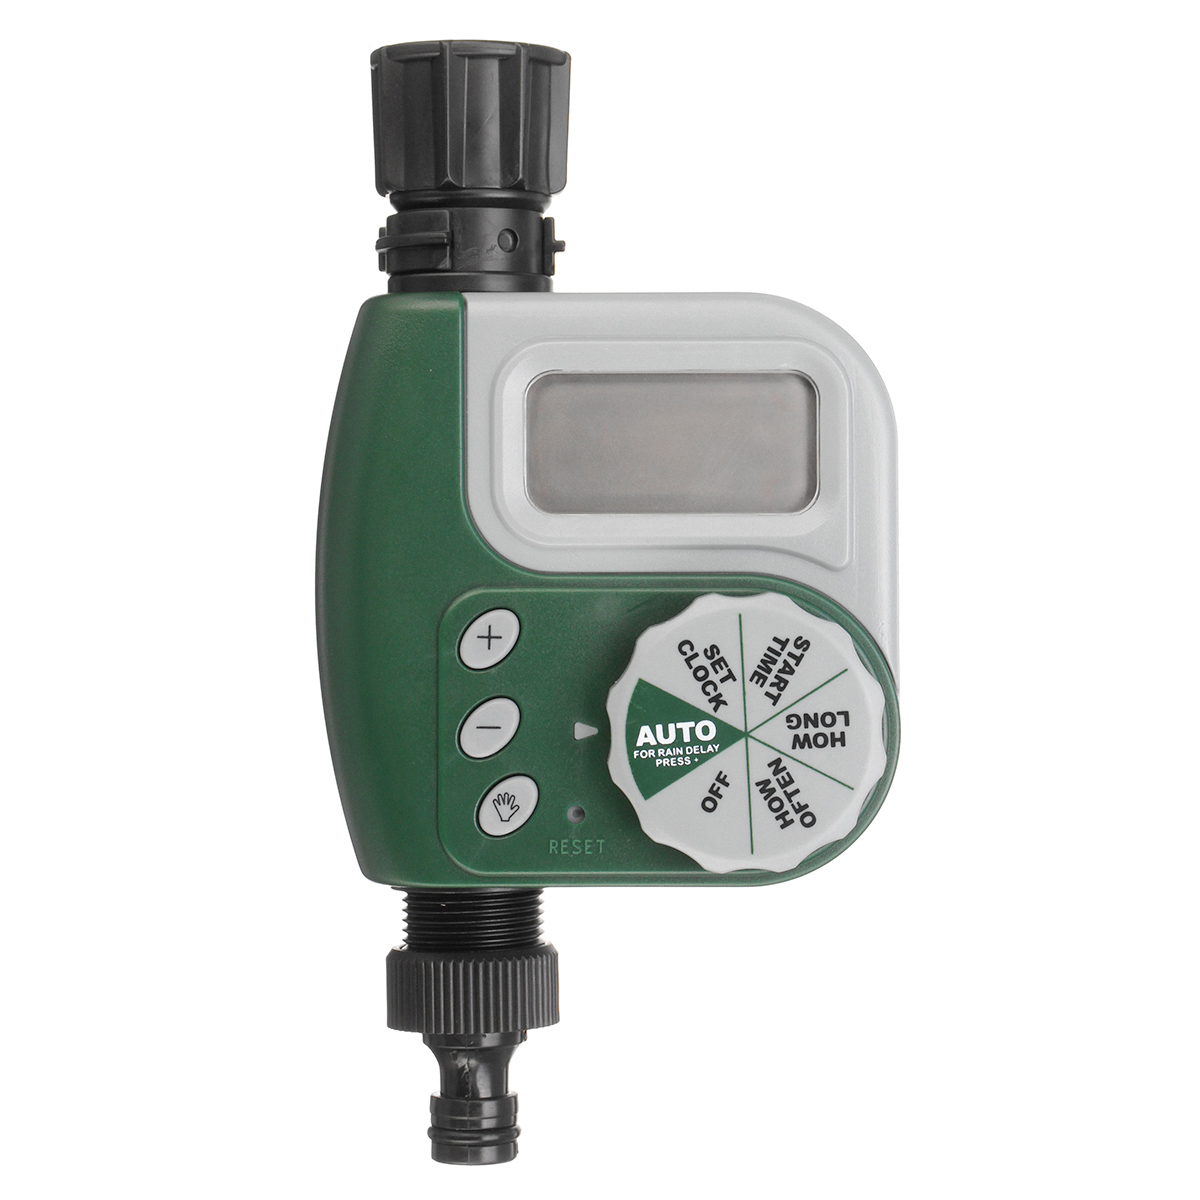 Electronic-Watering-Timer-Tap-Irrigation-Home-Garden-Water-Controller-Automatic-1439801